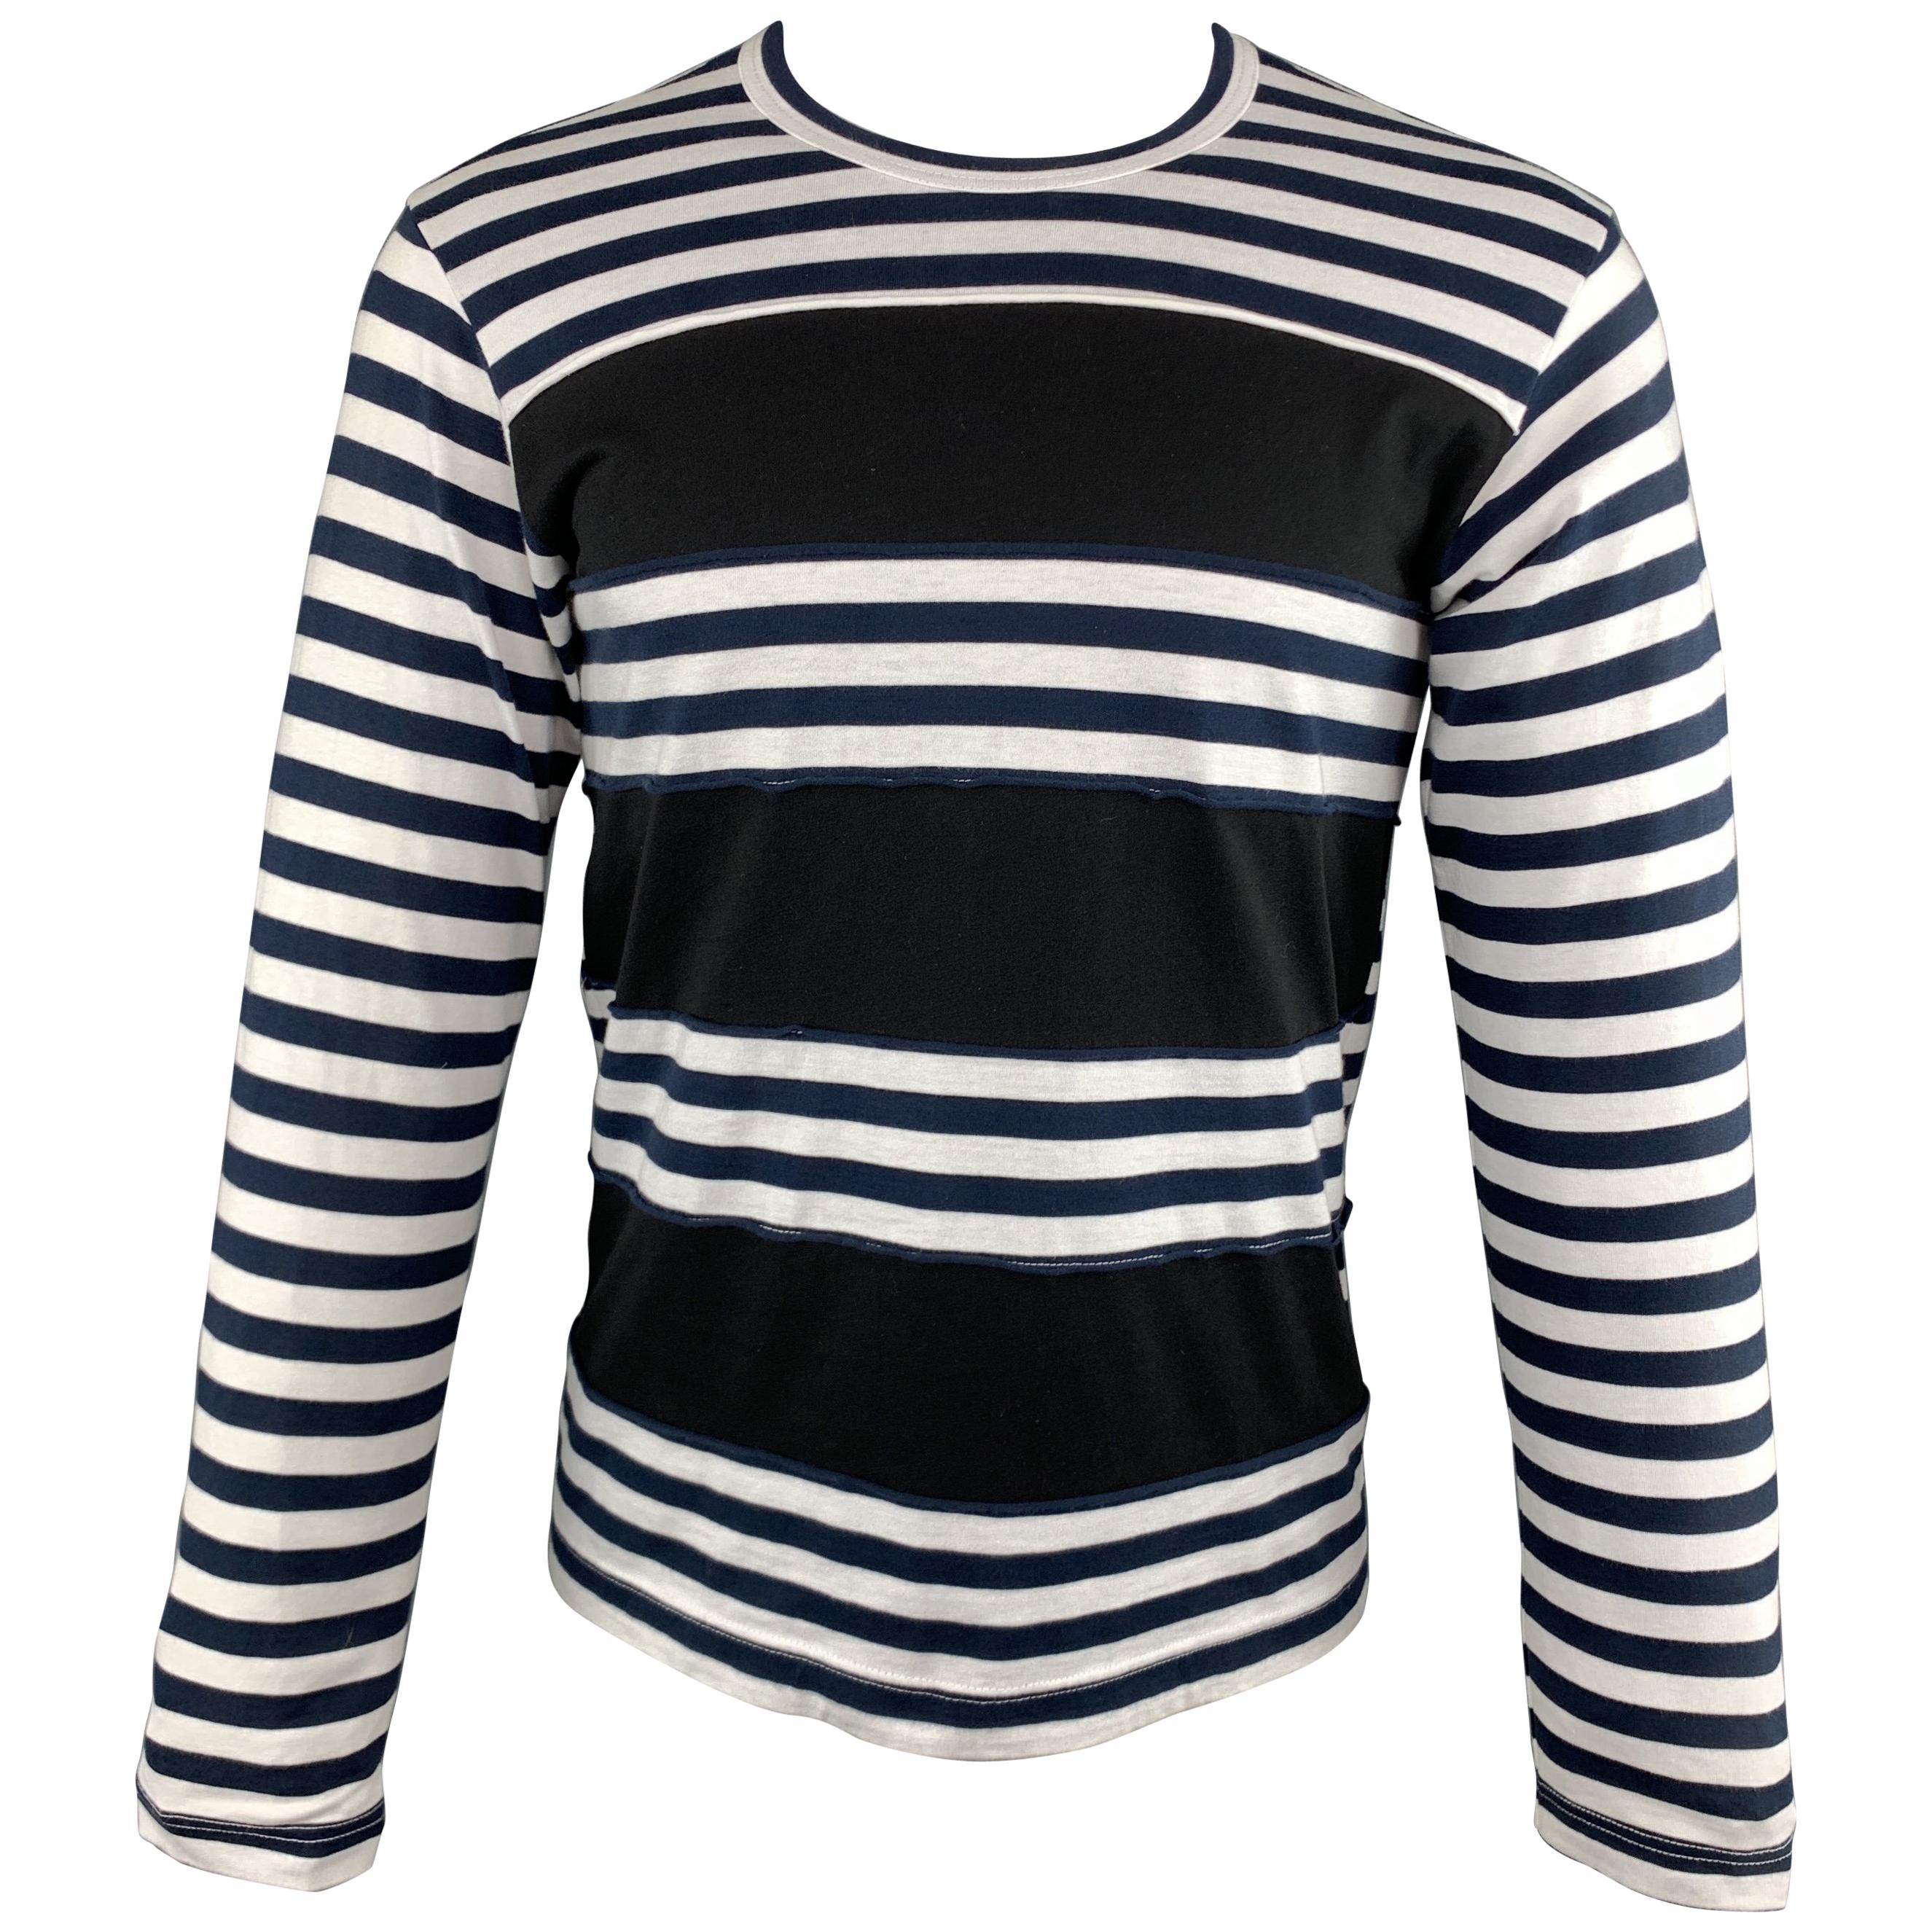 COMME des GARCONS SHIRT Size S Navy Black & White Striped Long Sleeve T-shirt